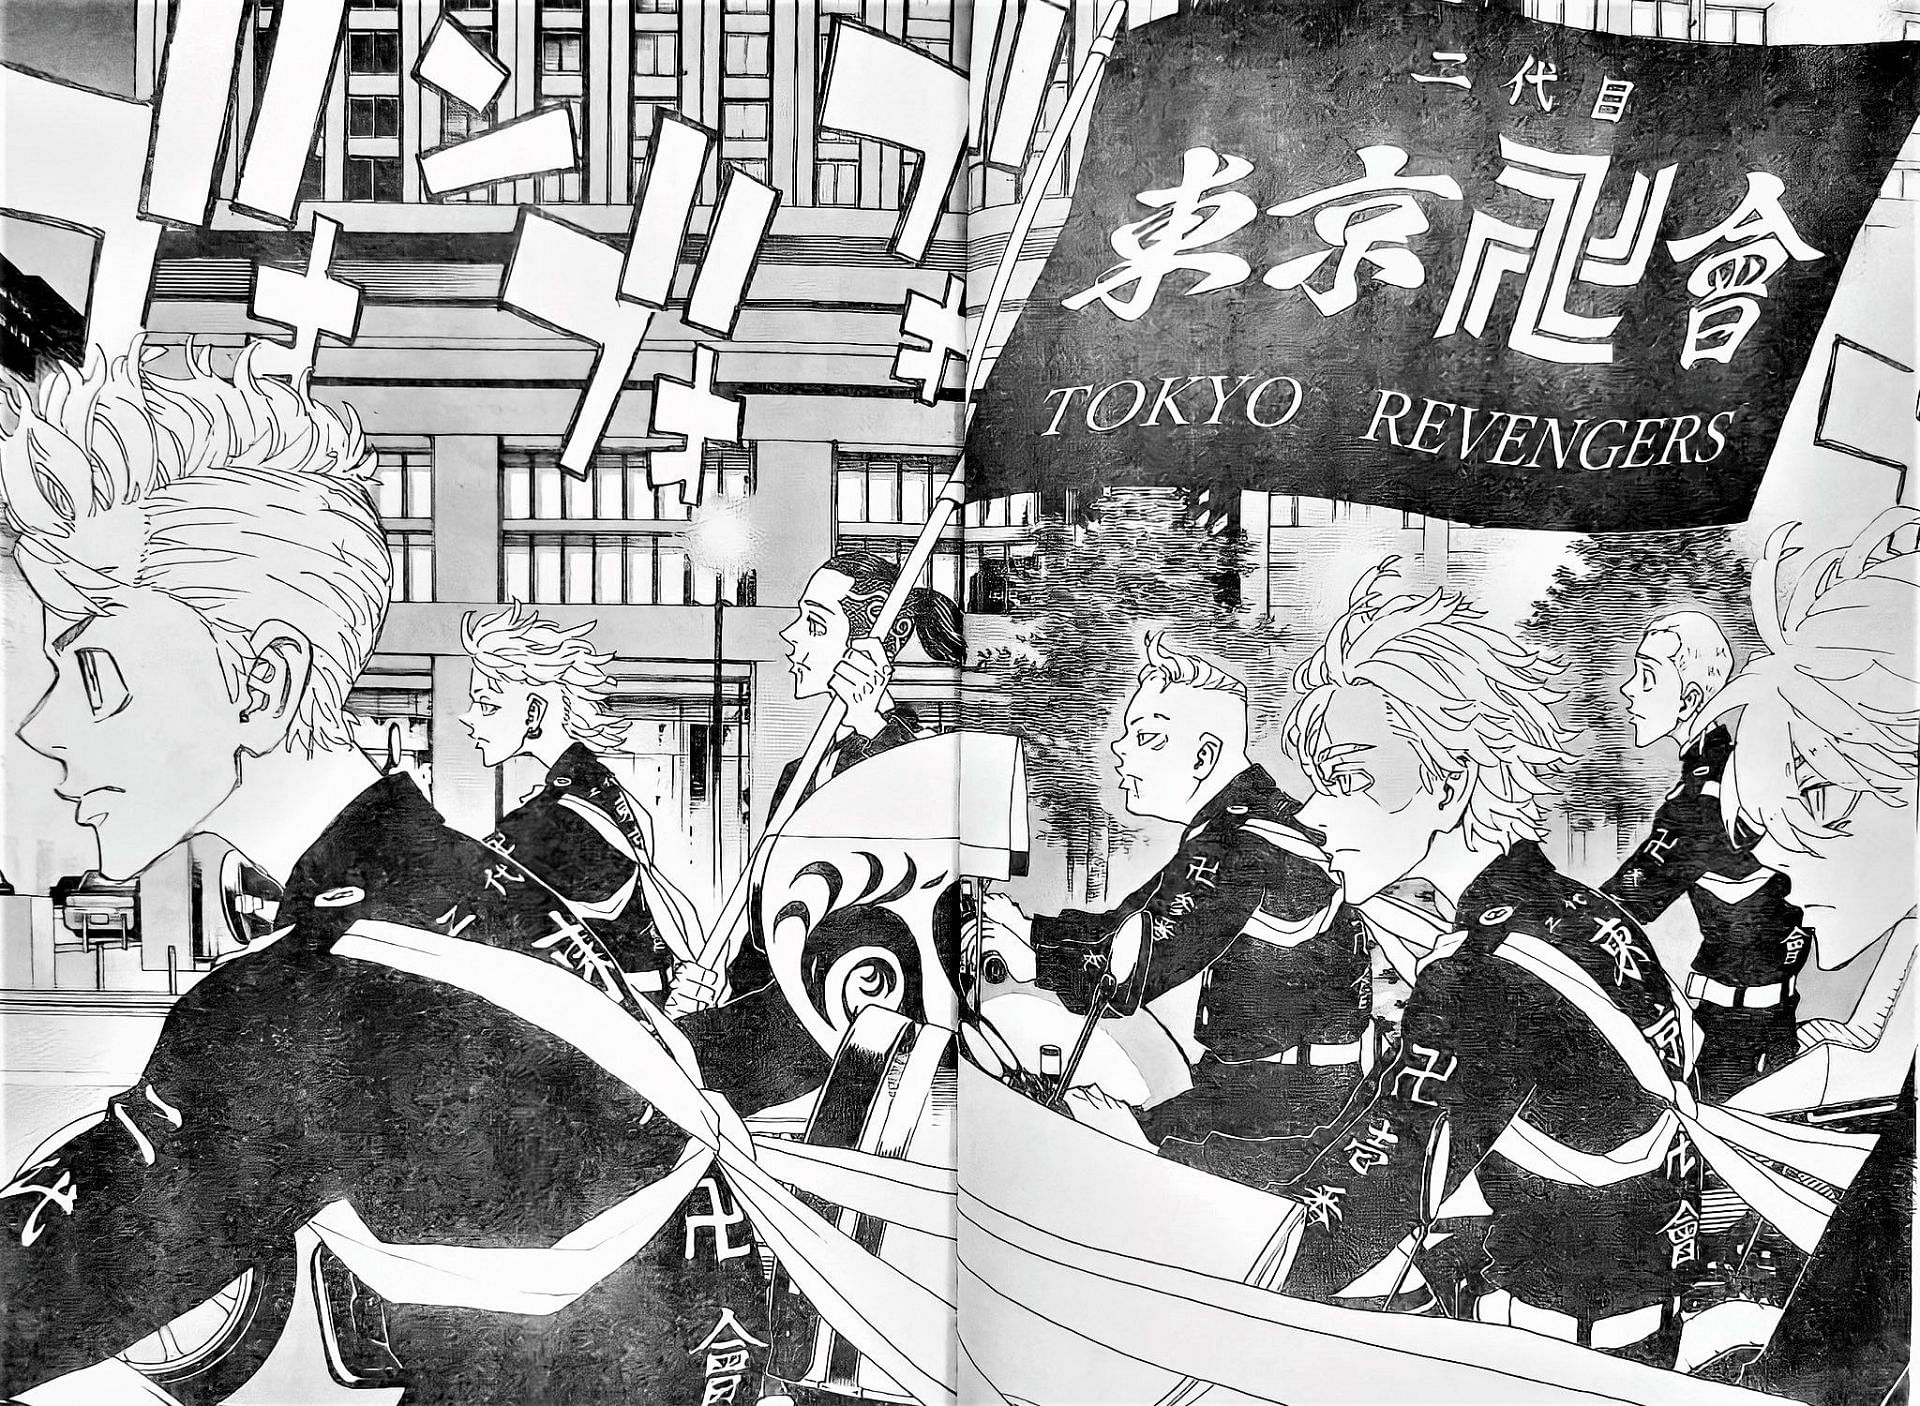 Tokyo Revengers chapter 243 raw scans reveal the formation of Kanto Manji, Takemichi and Mikey's fight begins